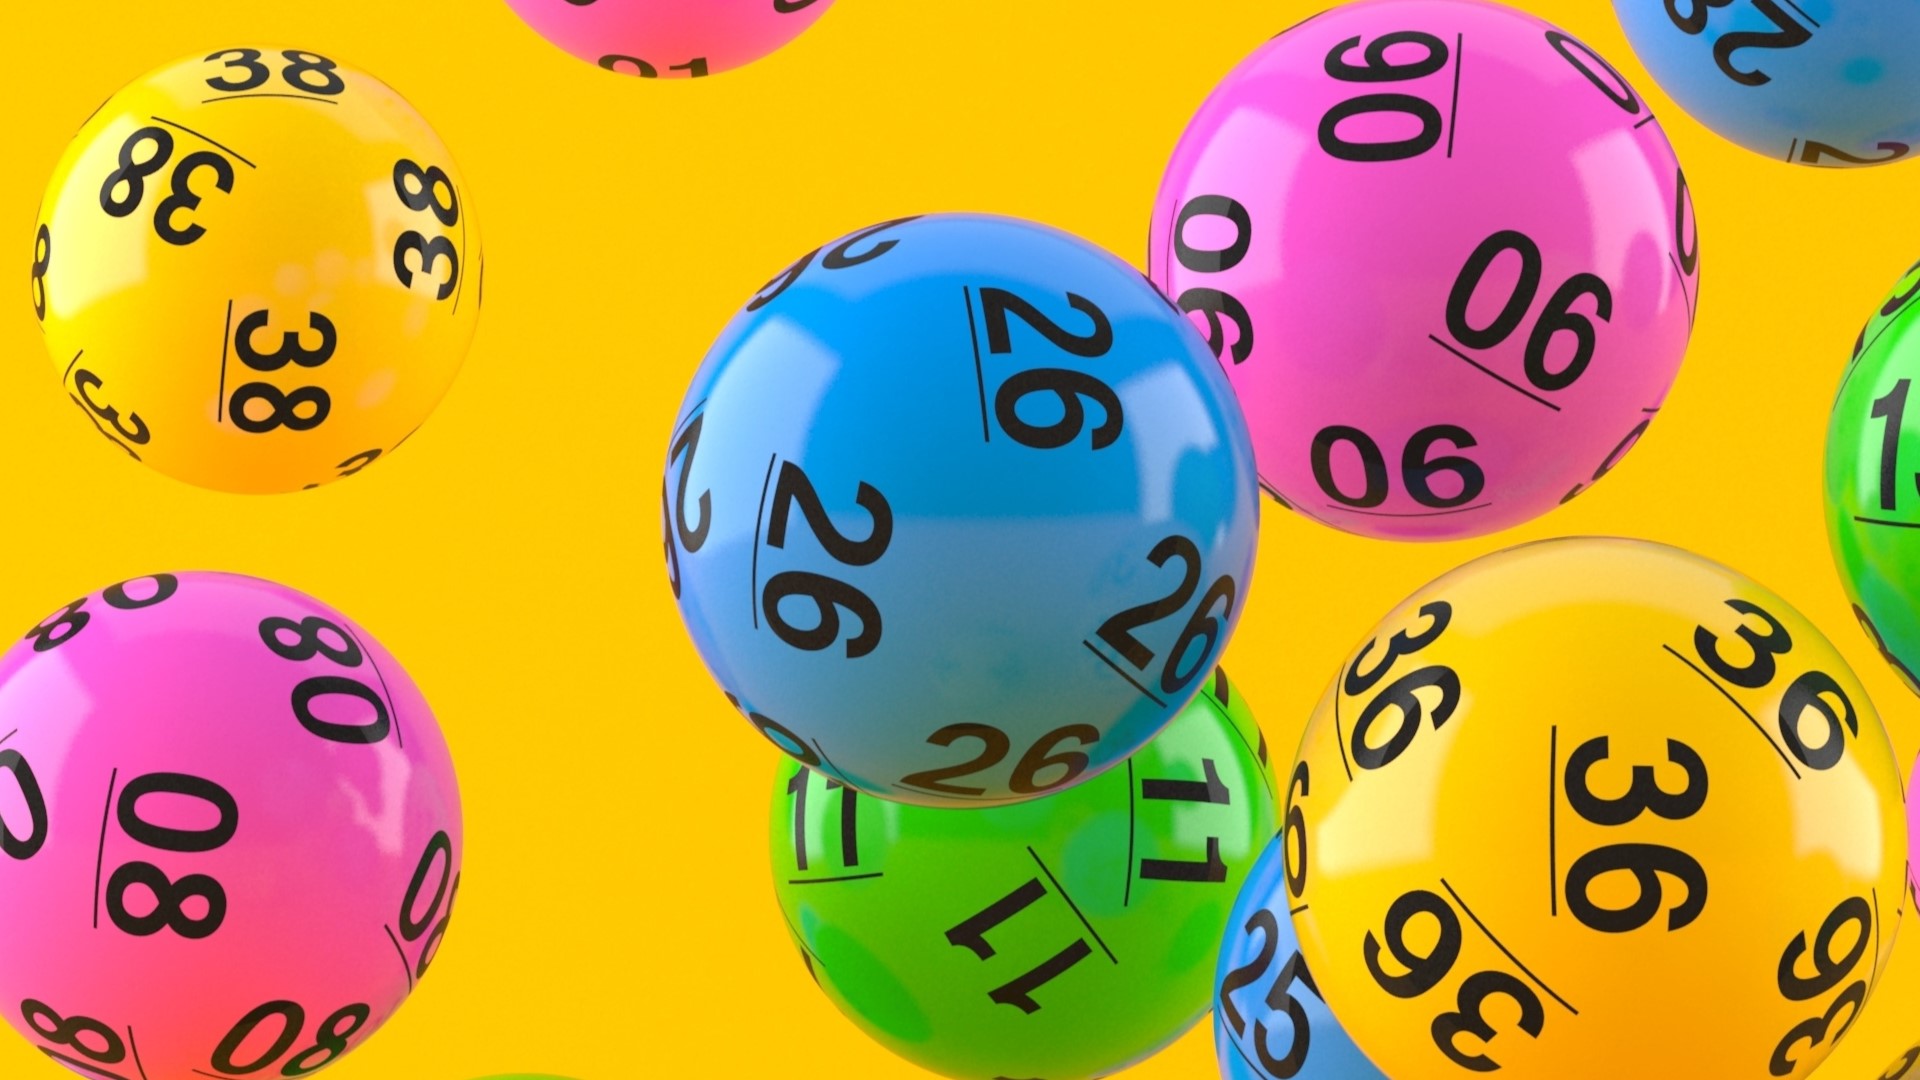 The NYS Lottery announced a recent TAKE 5 winning ticket that was sold in North Tonawanda.